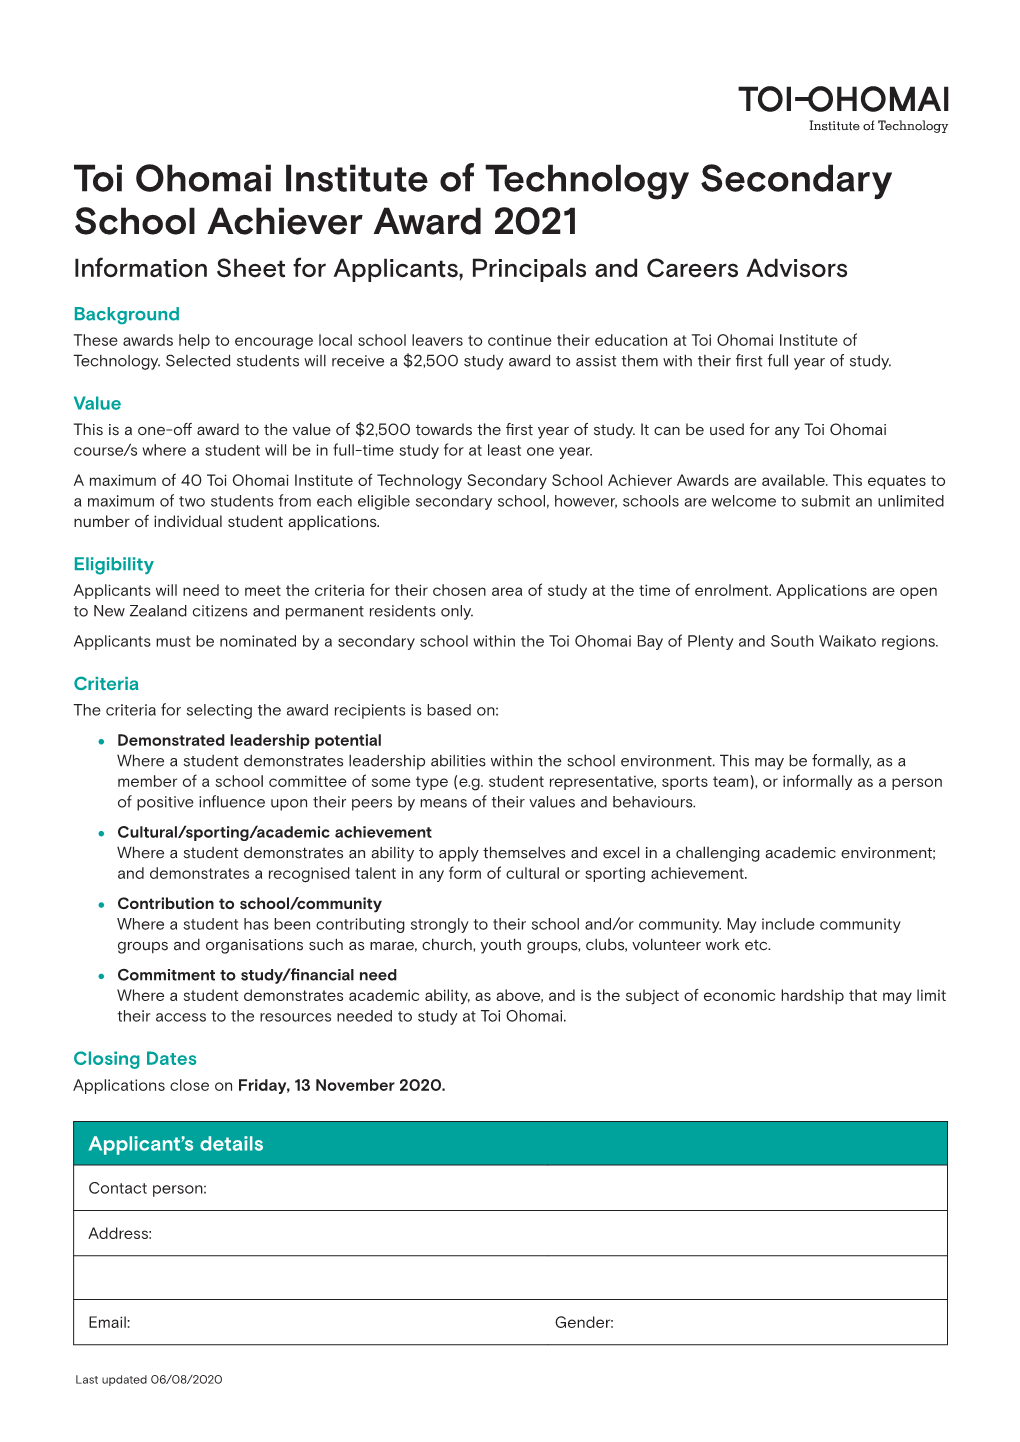 Toi Ohomai Institute of Technology Secondary School Achiever Award 2021 Information Sheet for Applicants, Principals and Careers Advisors